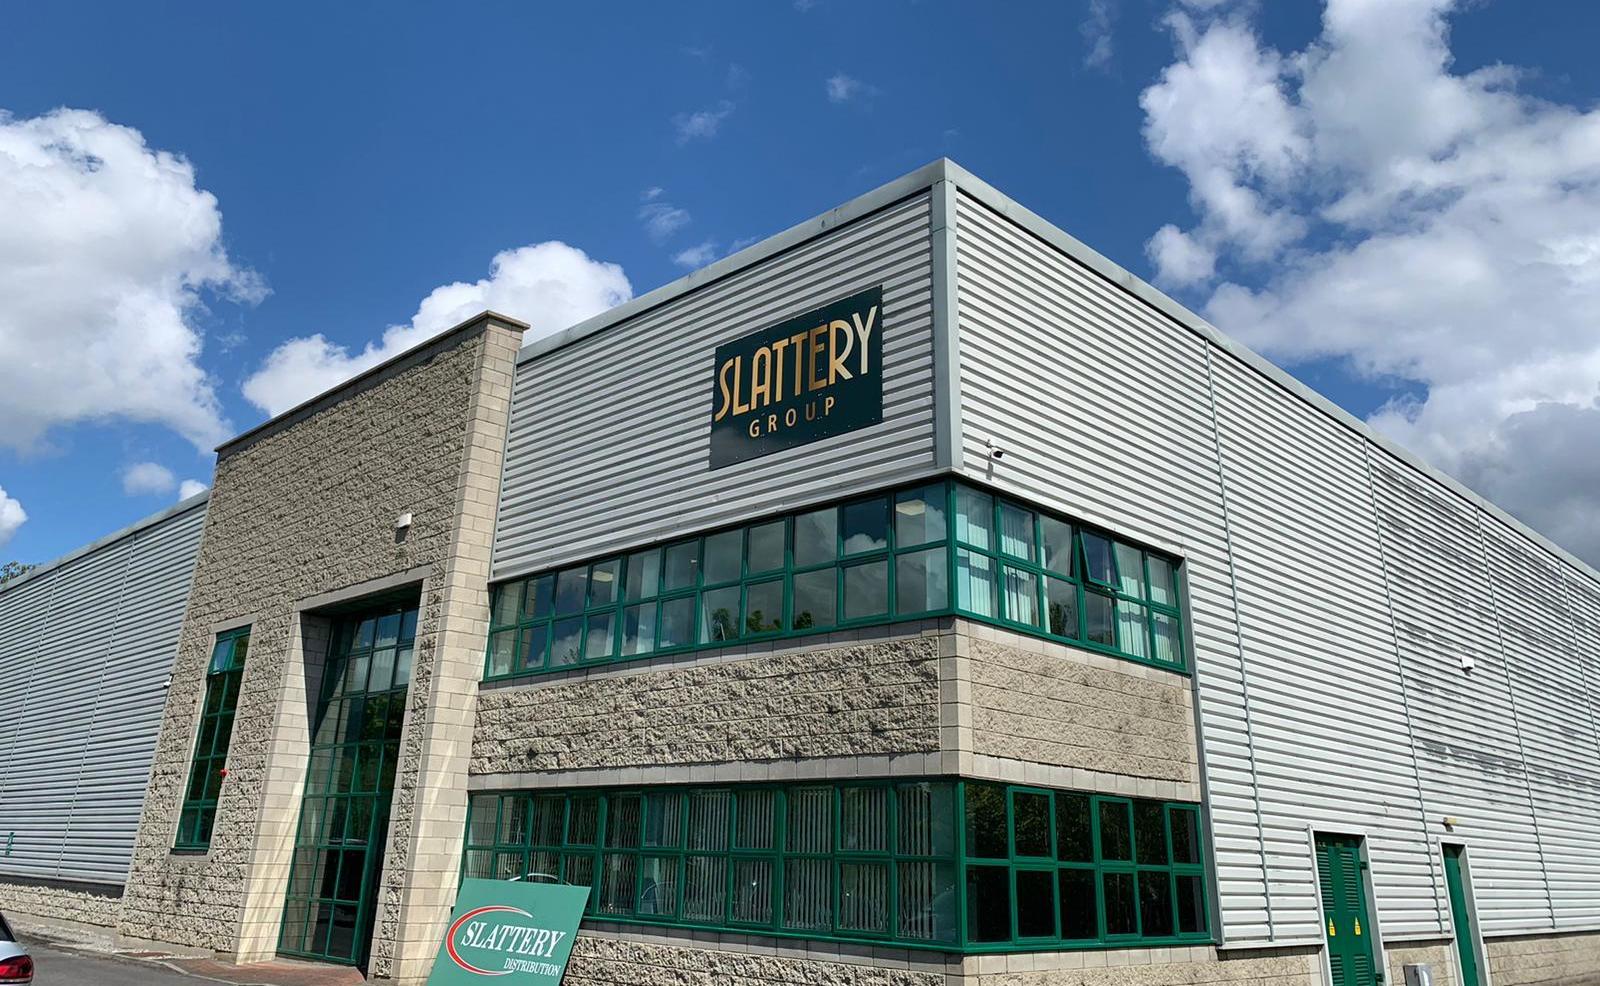 External signage for the Slattery Group in Dublin by Printcom